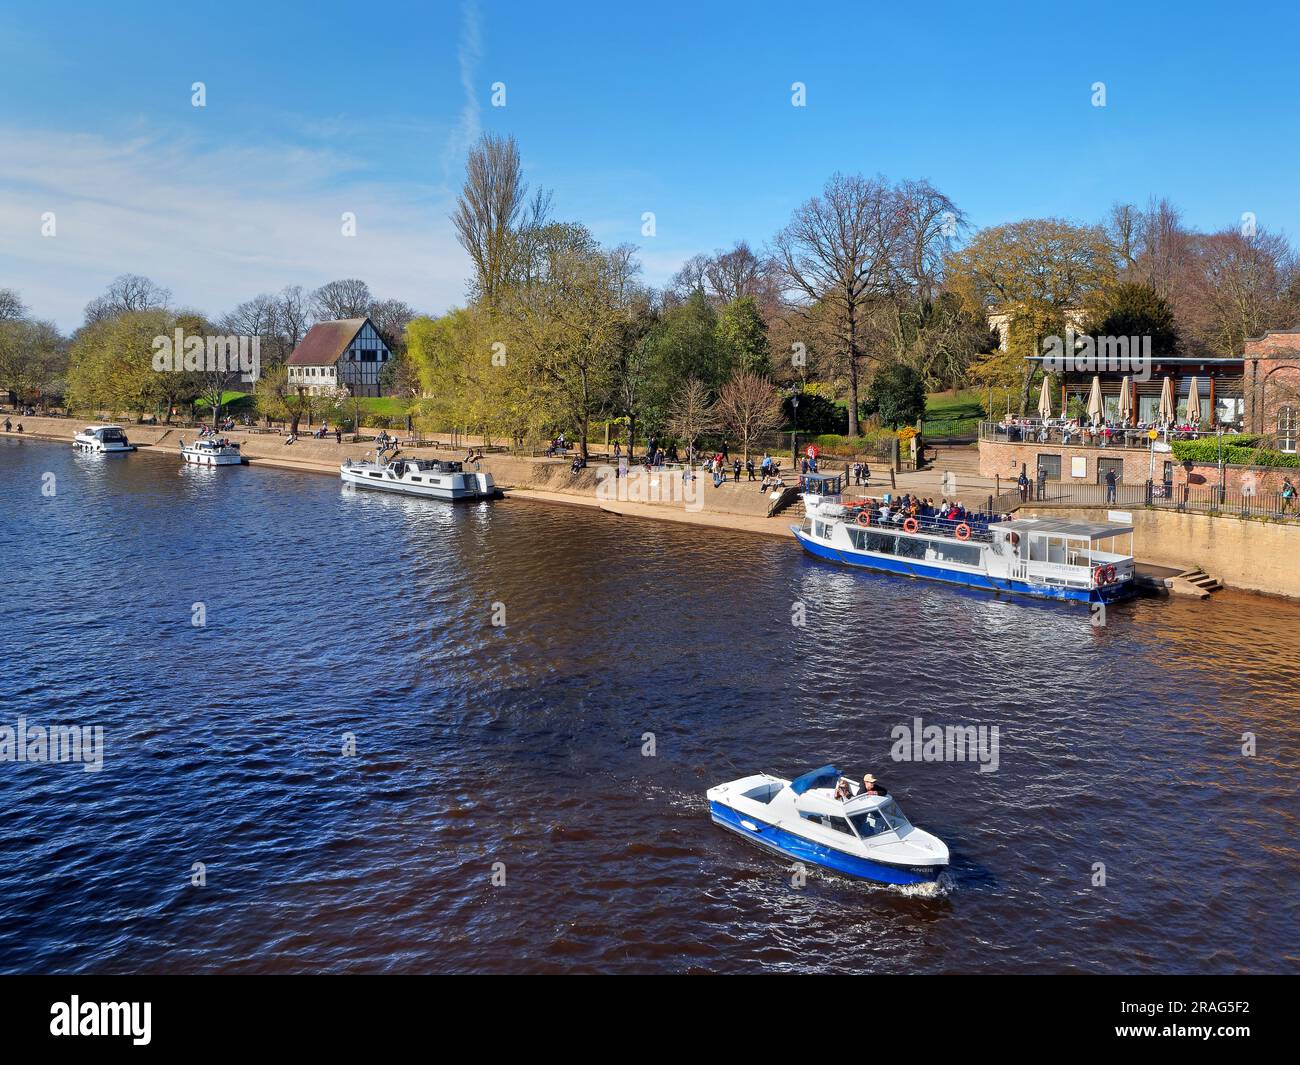 Großbritannien, North Yorkshire, York, Museum Gardens and Boats on River Ouse Stockfoto